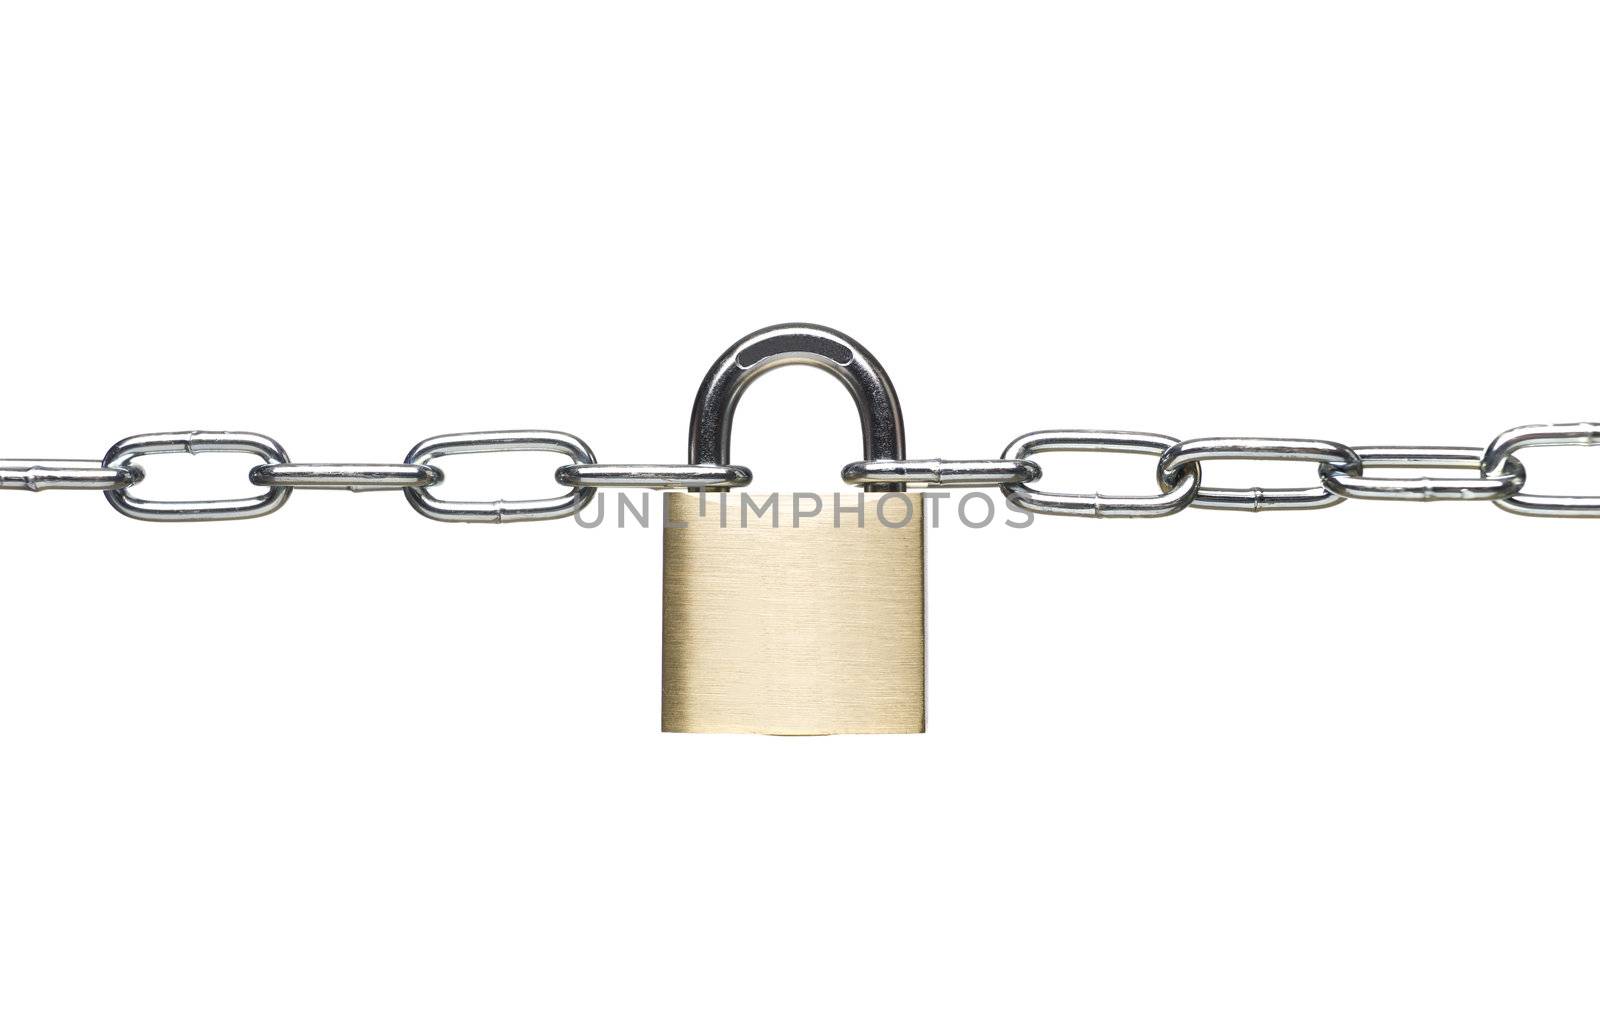 Padlock with a chain by gemenacom